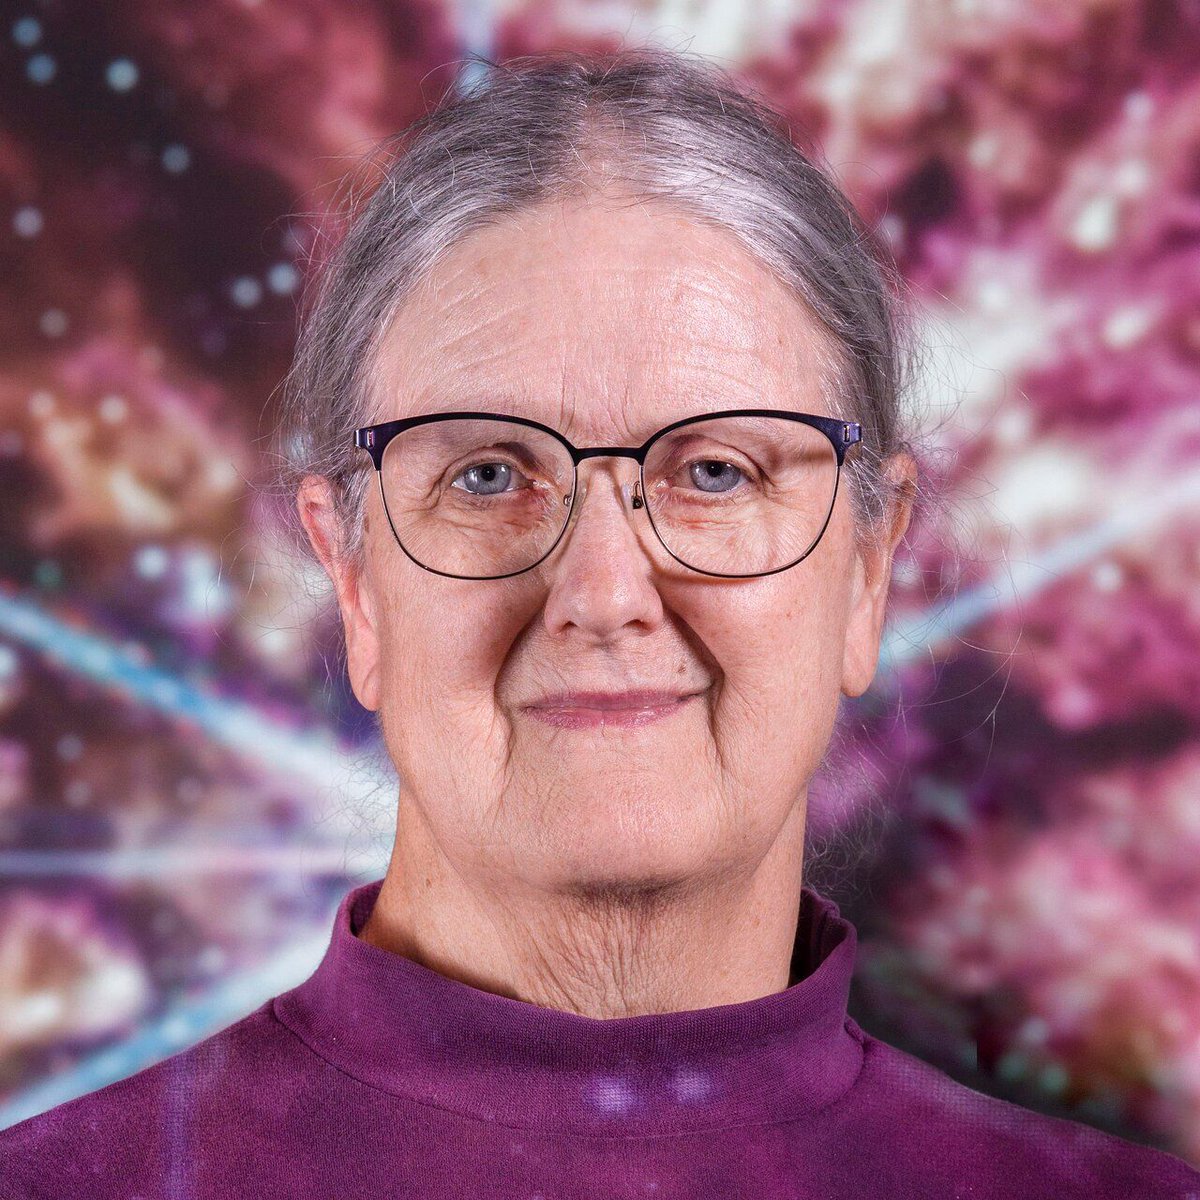 The 2024 Gruber Cosmology Prize recognises Marcia Rieke for her pioneering work in infrared astronomy, especially her oversight of instruments allowing astronomers to explore the earliest galaxies in the universe. iau.org/news/pressrele…